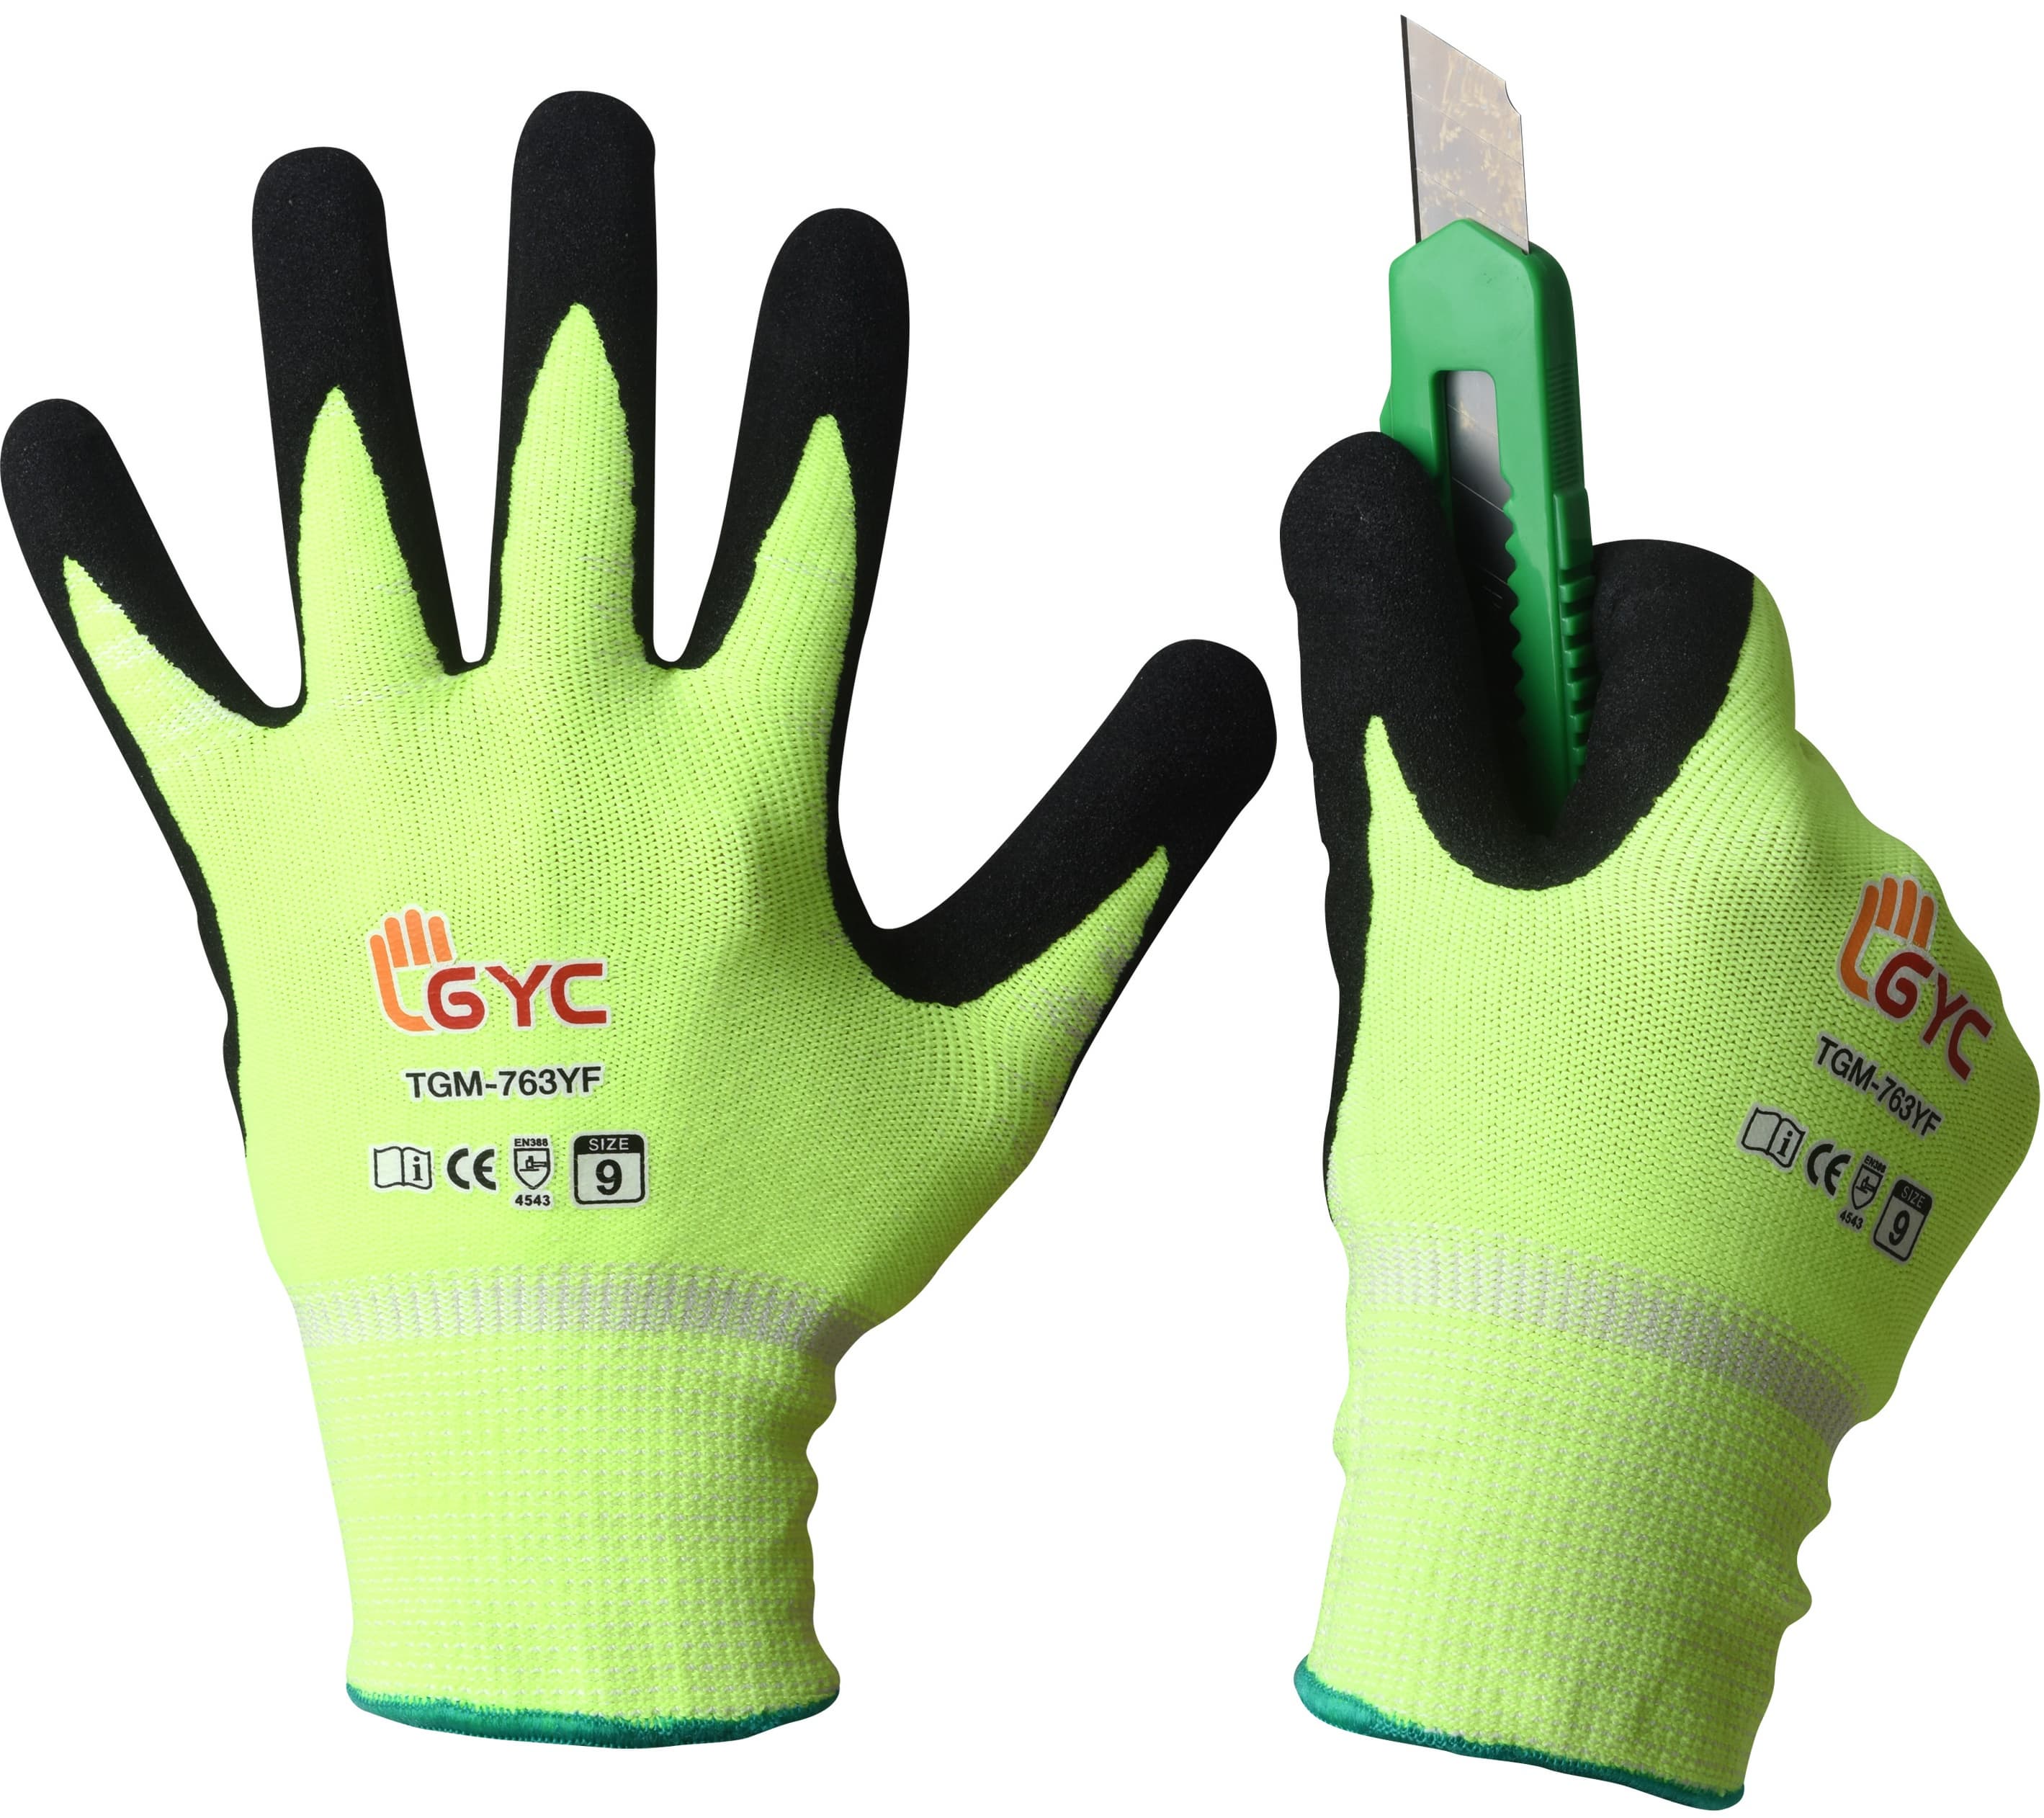 TGM_763YF _ Cut Resistant Gloves _ Level 5 Cut Protection Dbl_ Layered Nitrile Micro finish